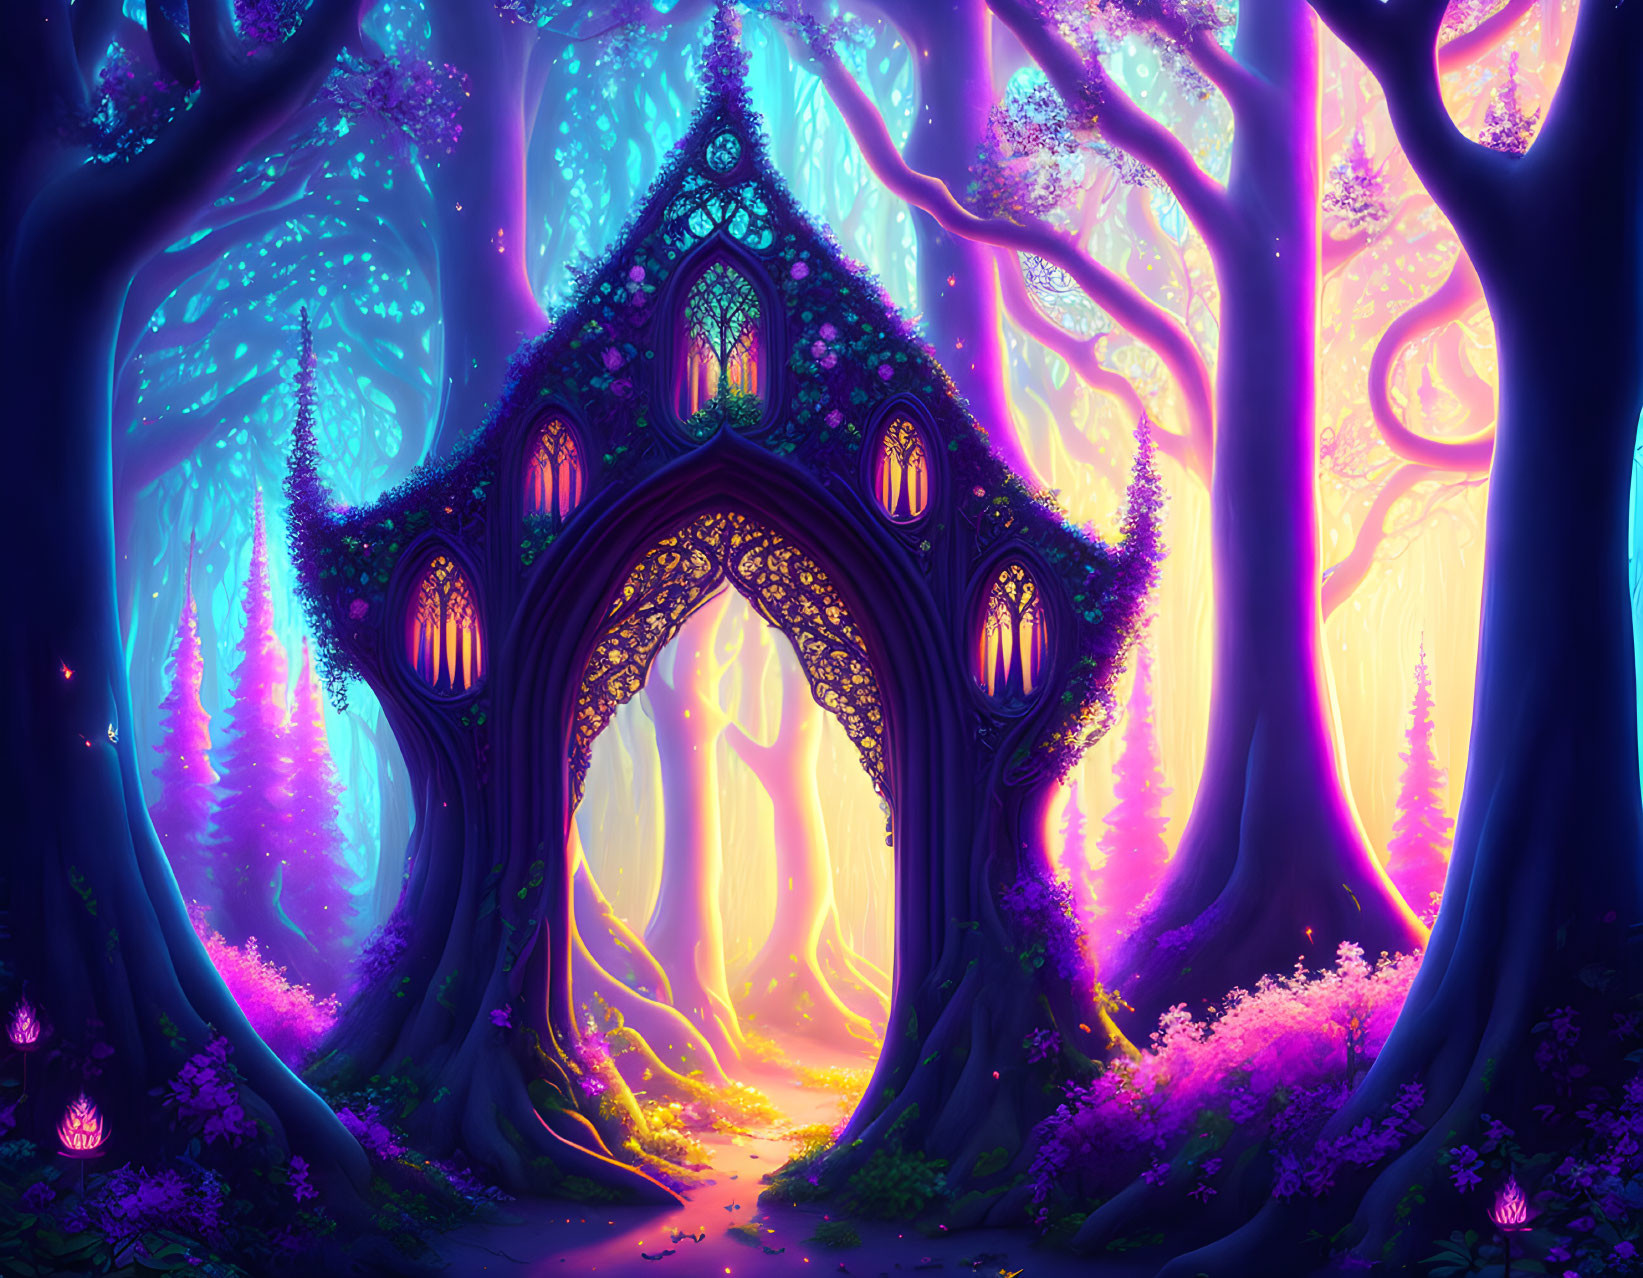 Detailed Ornate Gate in Vibrant Fantasy Woodland with Luminous Purple, Pink, and Yellow